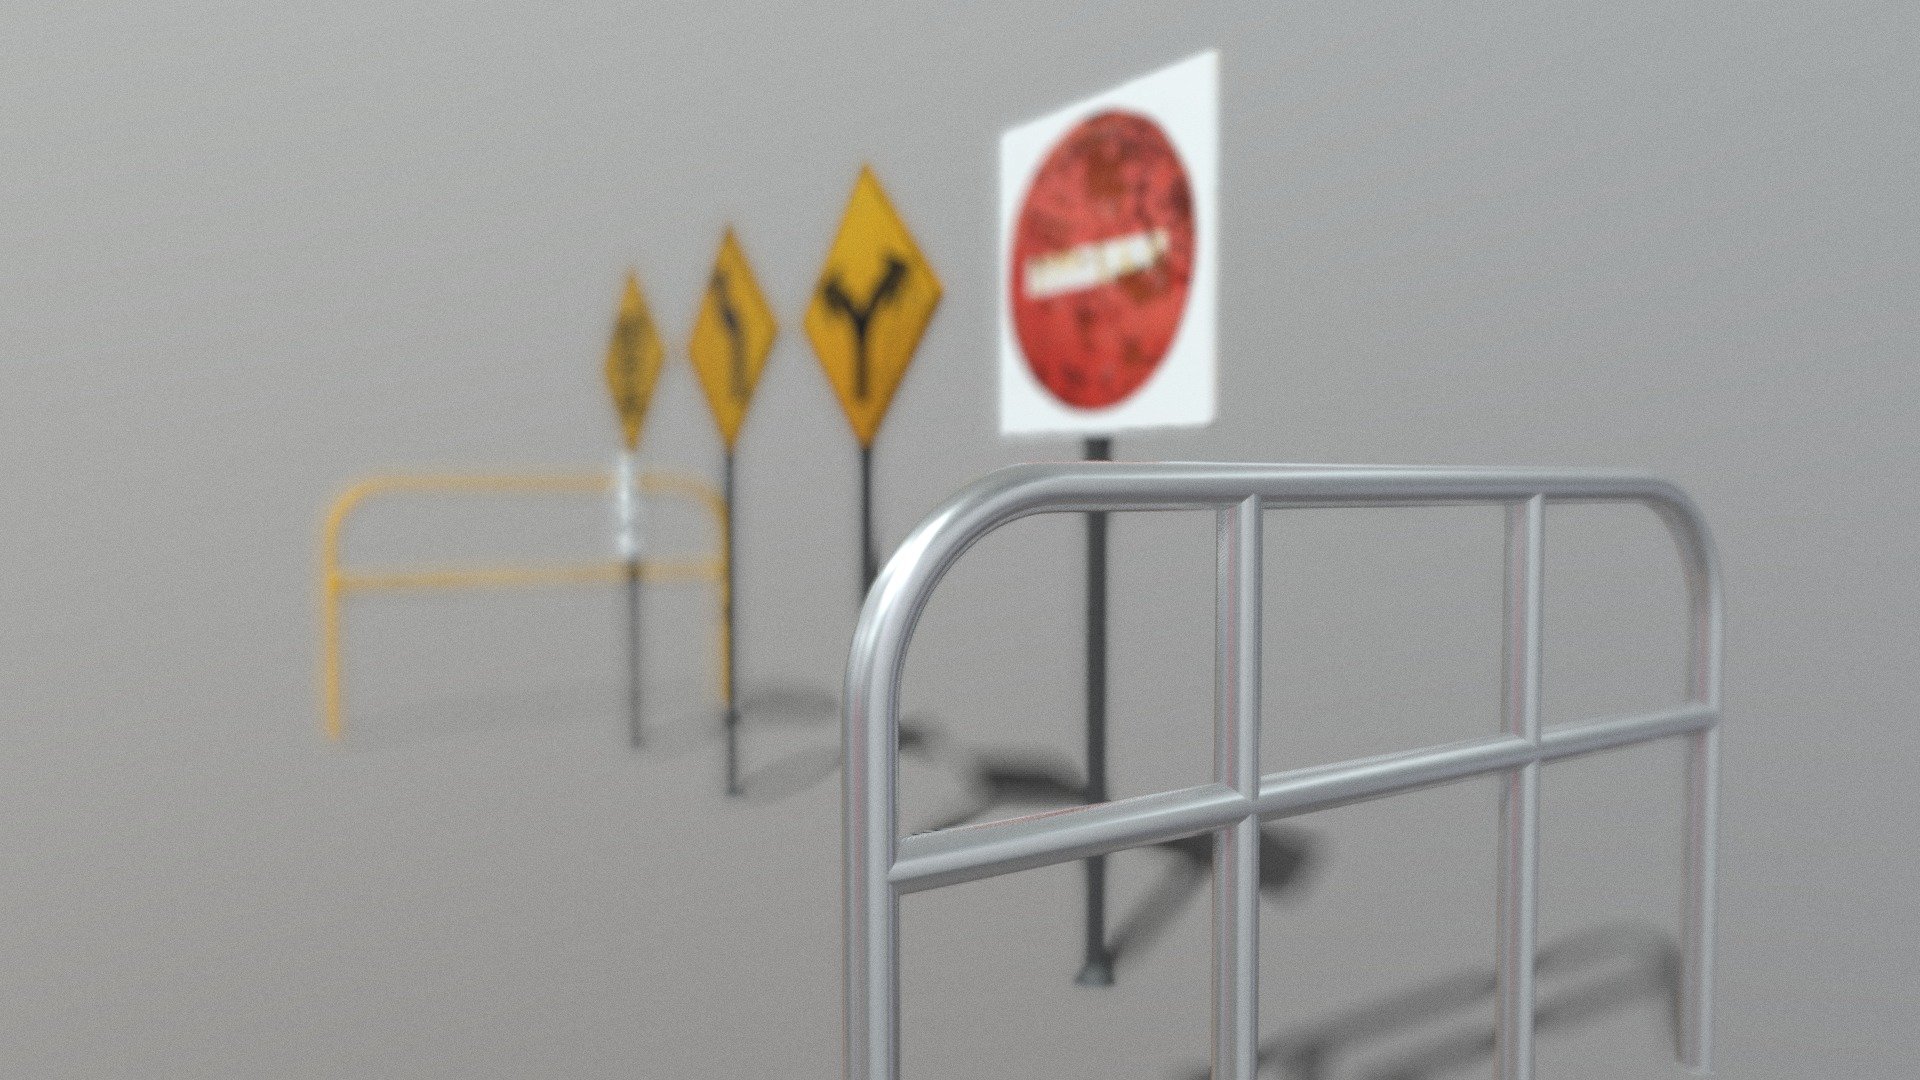 Note: Preview has some issues in rendering the model correctly. Once you download, it is completly fine.

Hurrayyy🥳 it’s me stupids !!!

I bring this model to present you the highway road sign board with grills or barriers or whatever you call so.

Hope you found this 3D model usefull

Enjoy free 3D models!!!!!!!!!!!

ROY - Road sign boards and grills - Download Free 3D model by ROY (@roy.gearloft.in) 3d model